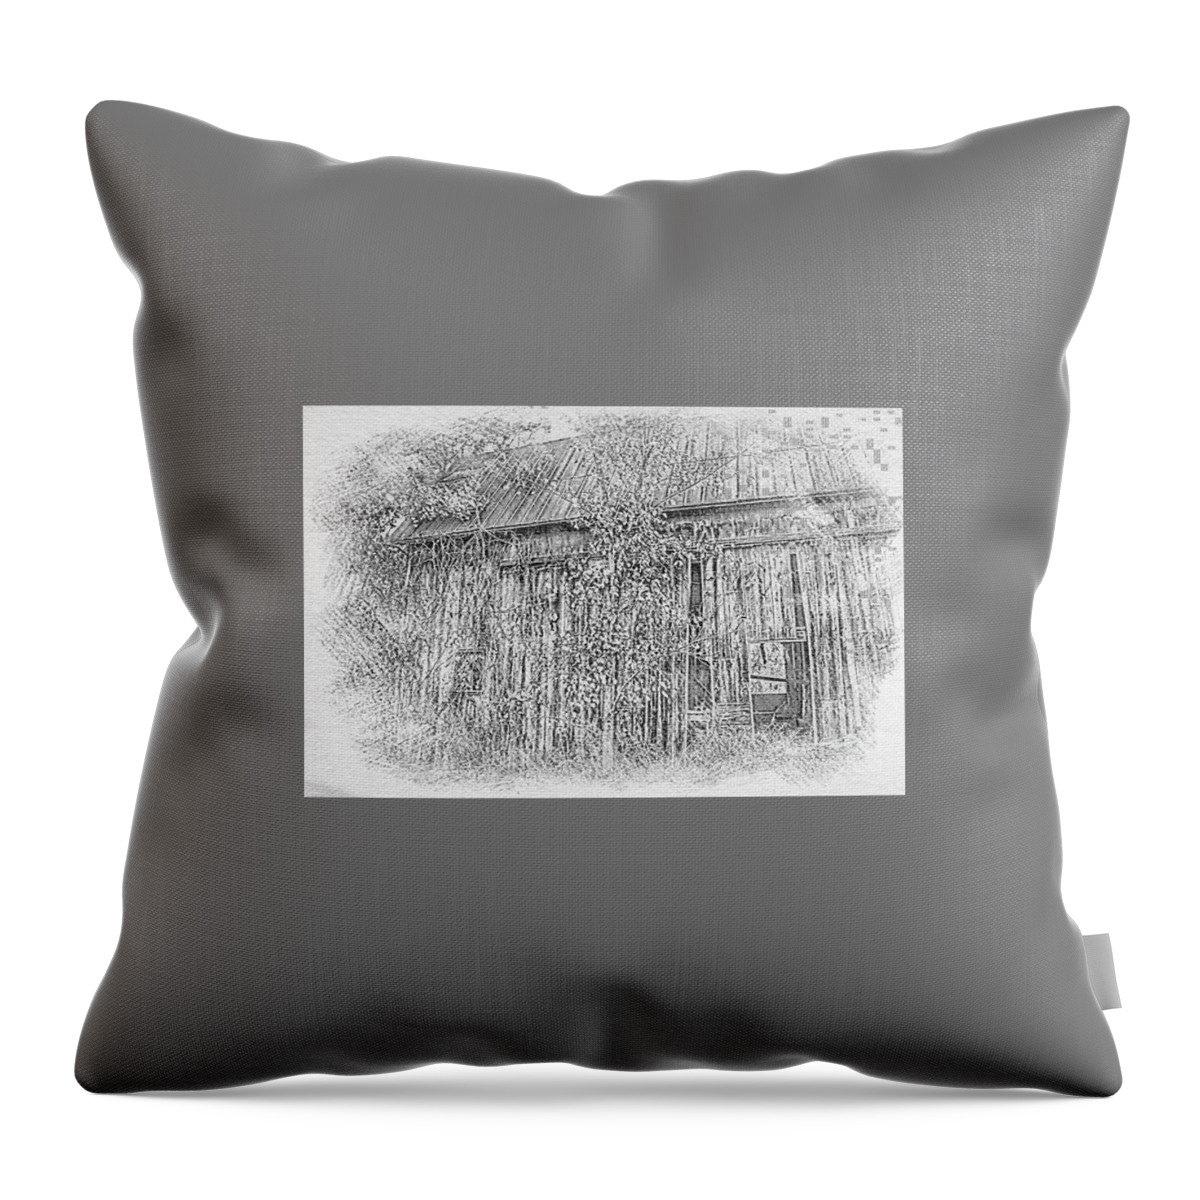 Barn Throw Pillow featuring the photograph 0002 - Annie's Barn II by Sheryl L Sutter